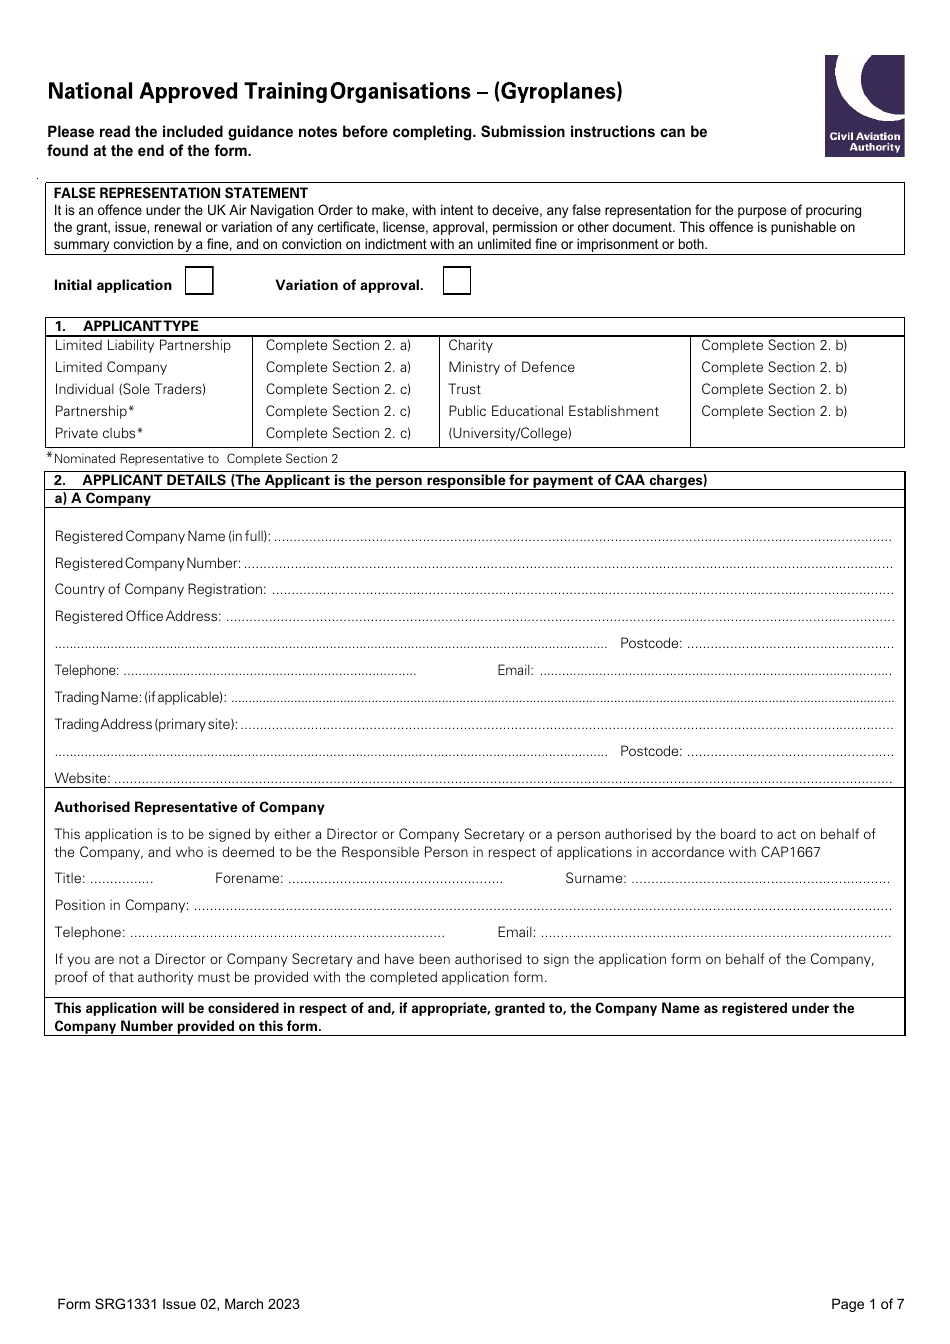 Form SRG1331 National Approved Training Organisations - (Gyroplanes) - United Kingdom, Page 1